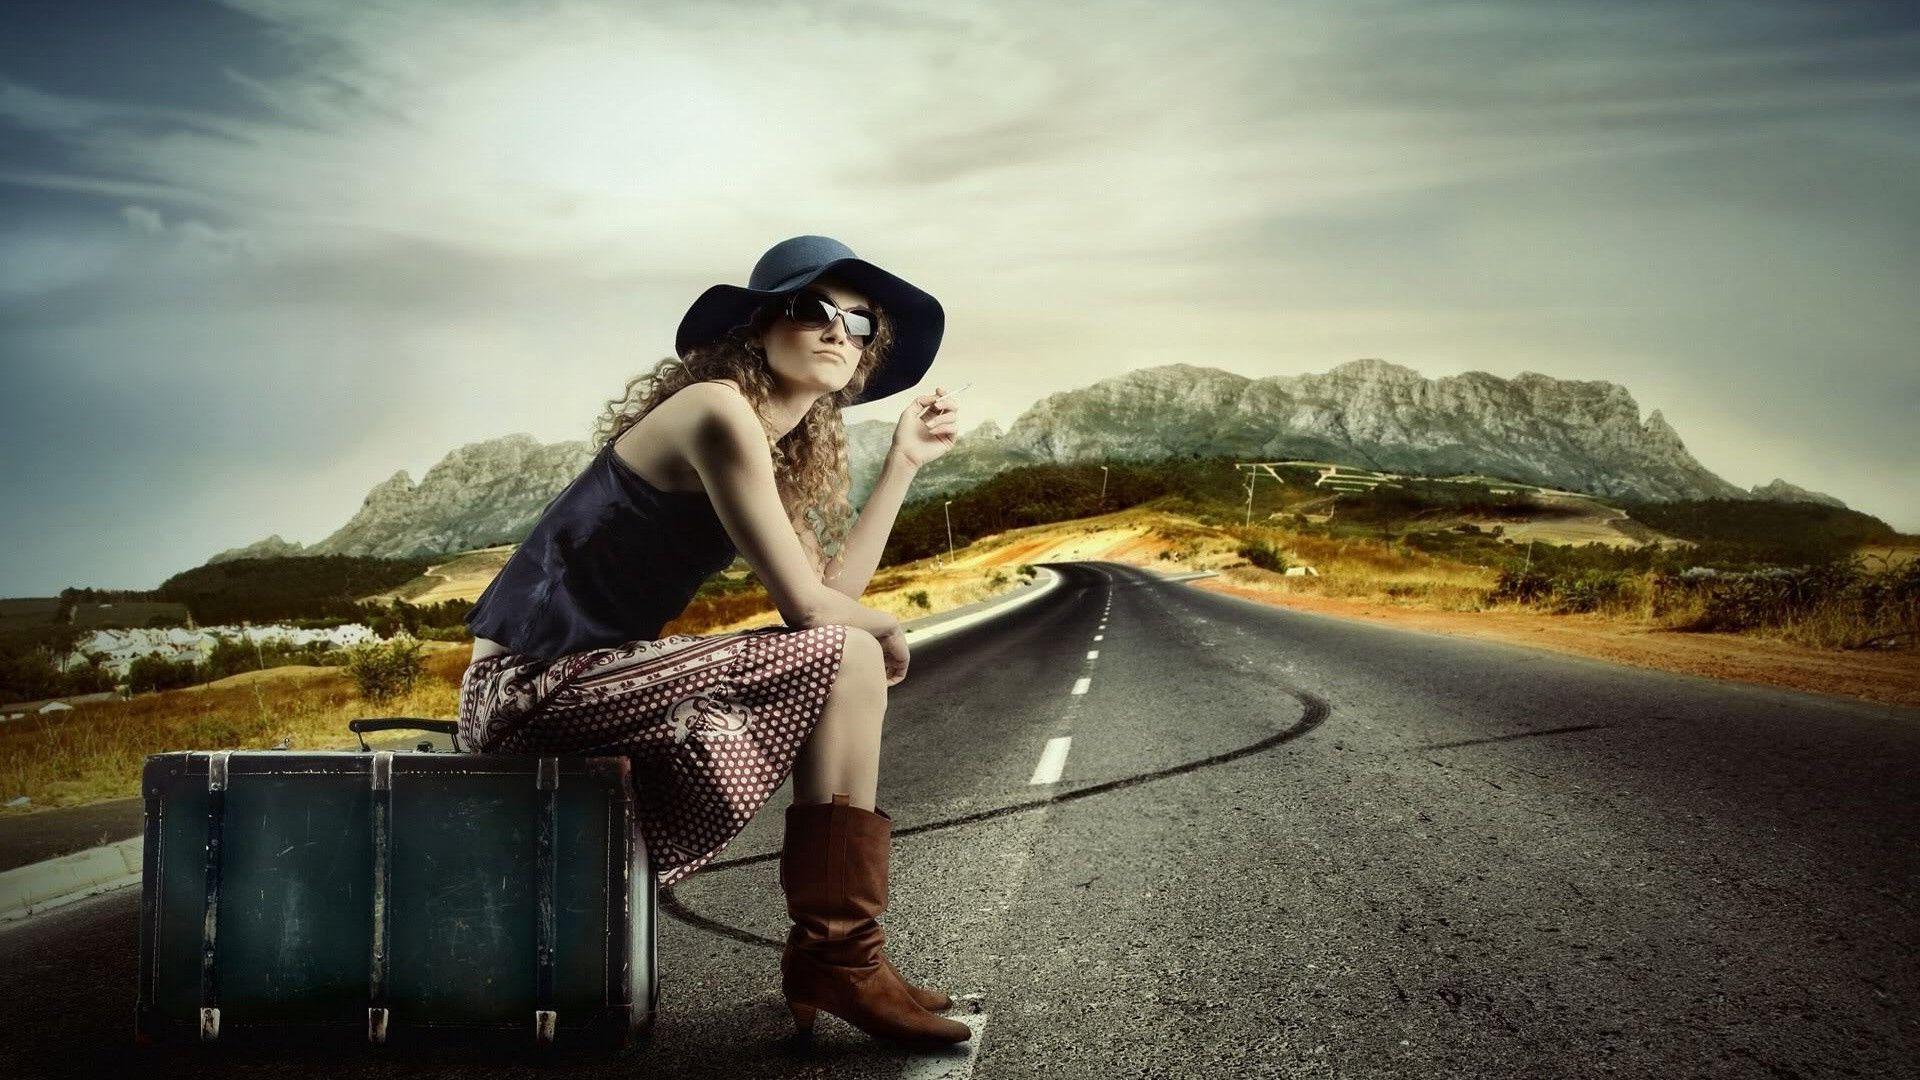 Hd Girl Sitting On The Suitcare On The Road Wallpaper - Traveller Woman - HD Wallpaper 